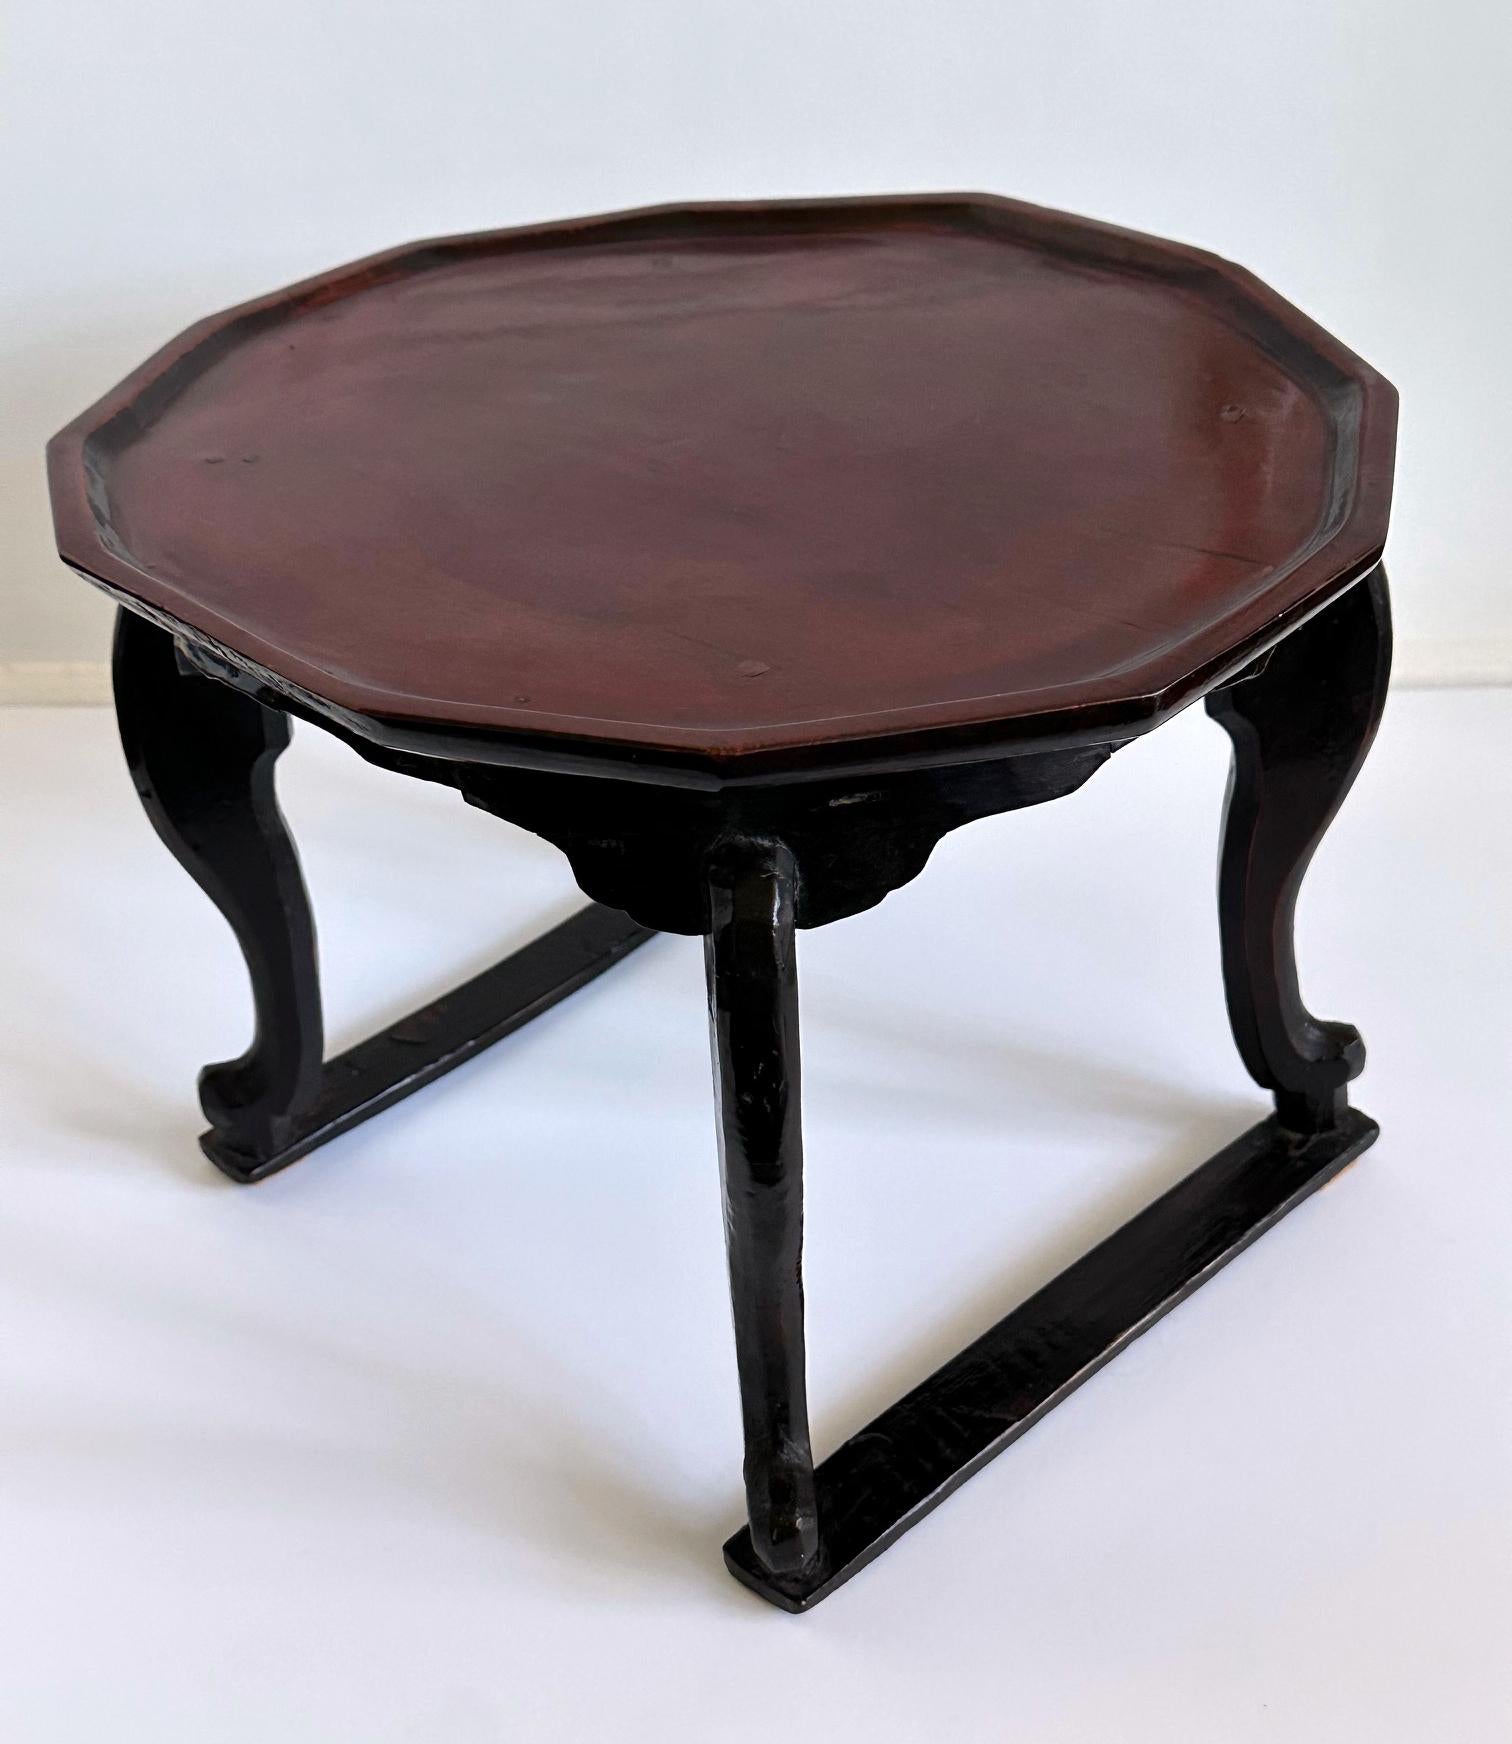 Other Antique Korean Lacquer Wood Soban Table Joseon Period For Sale